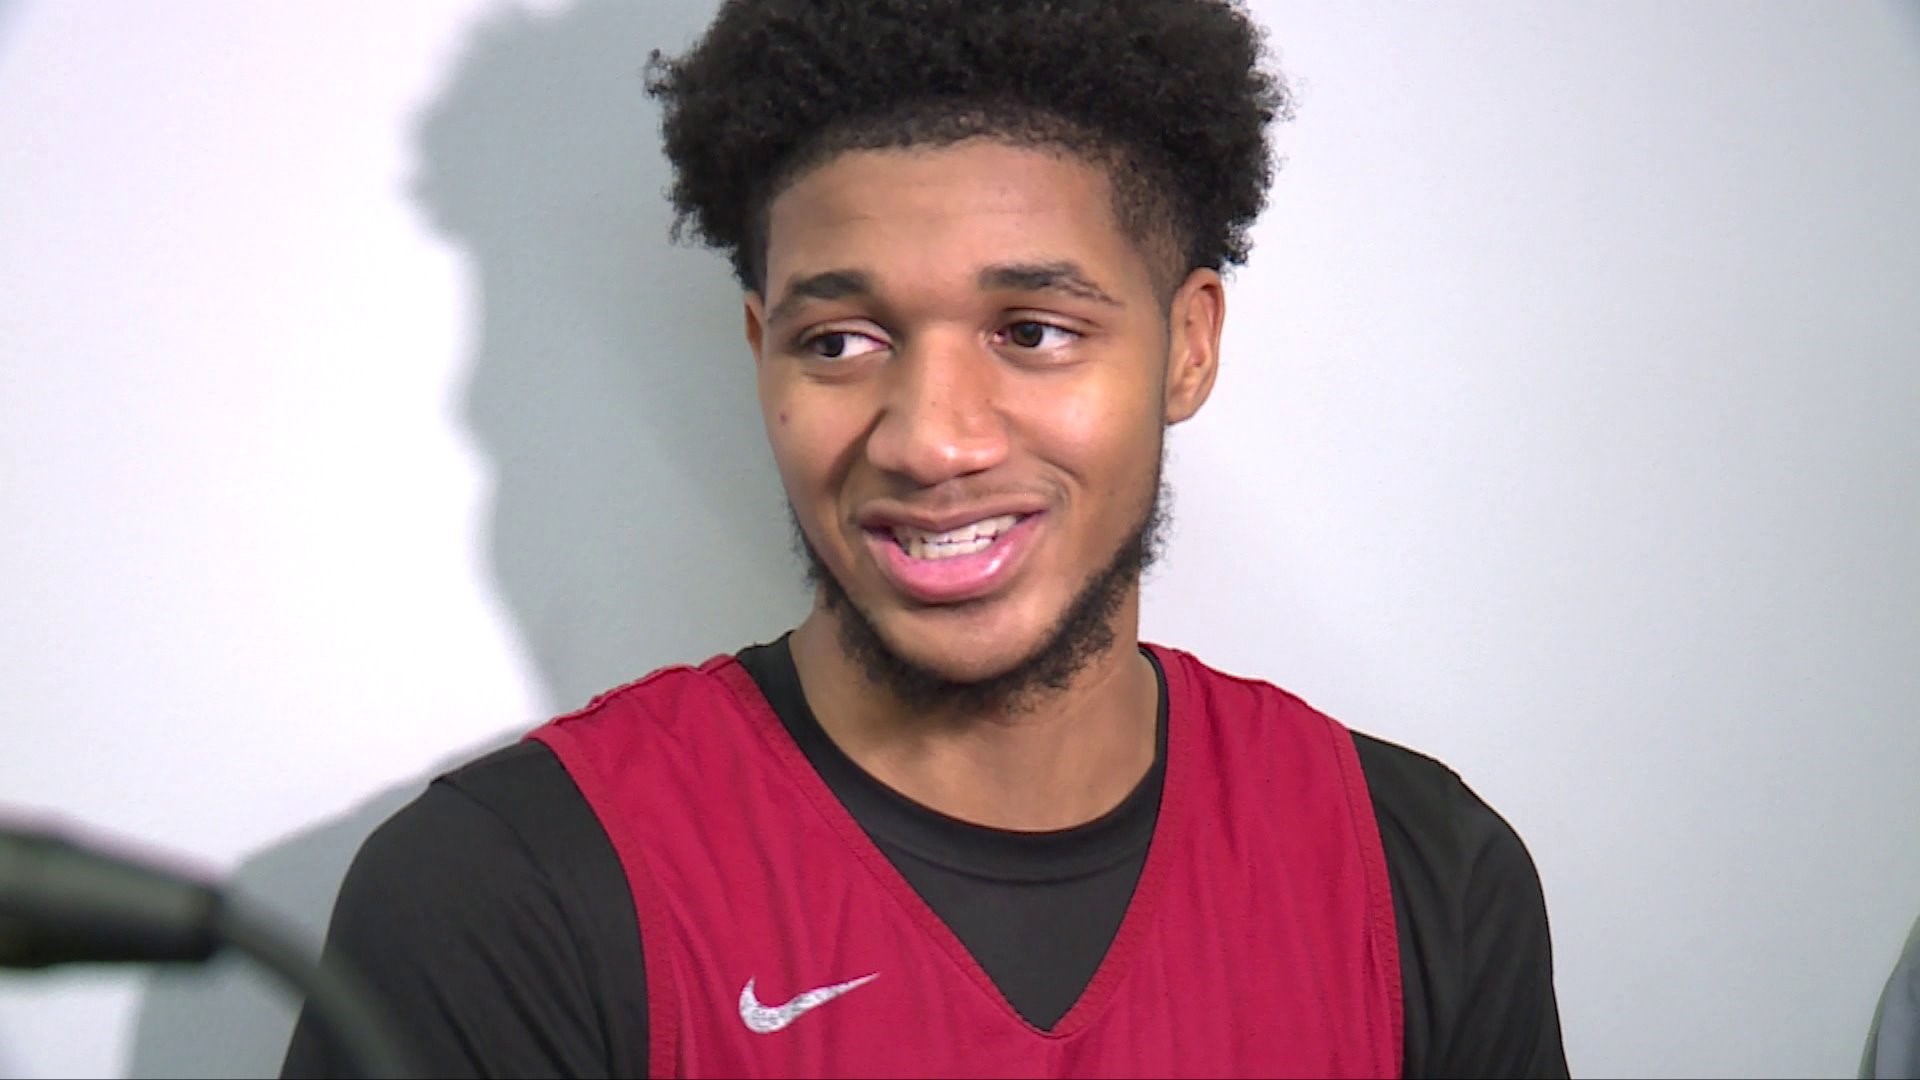 Full Interview: Musselman Excited To Play In Little Rock | 5newsonline.com